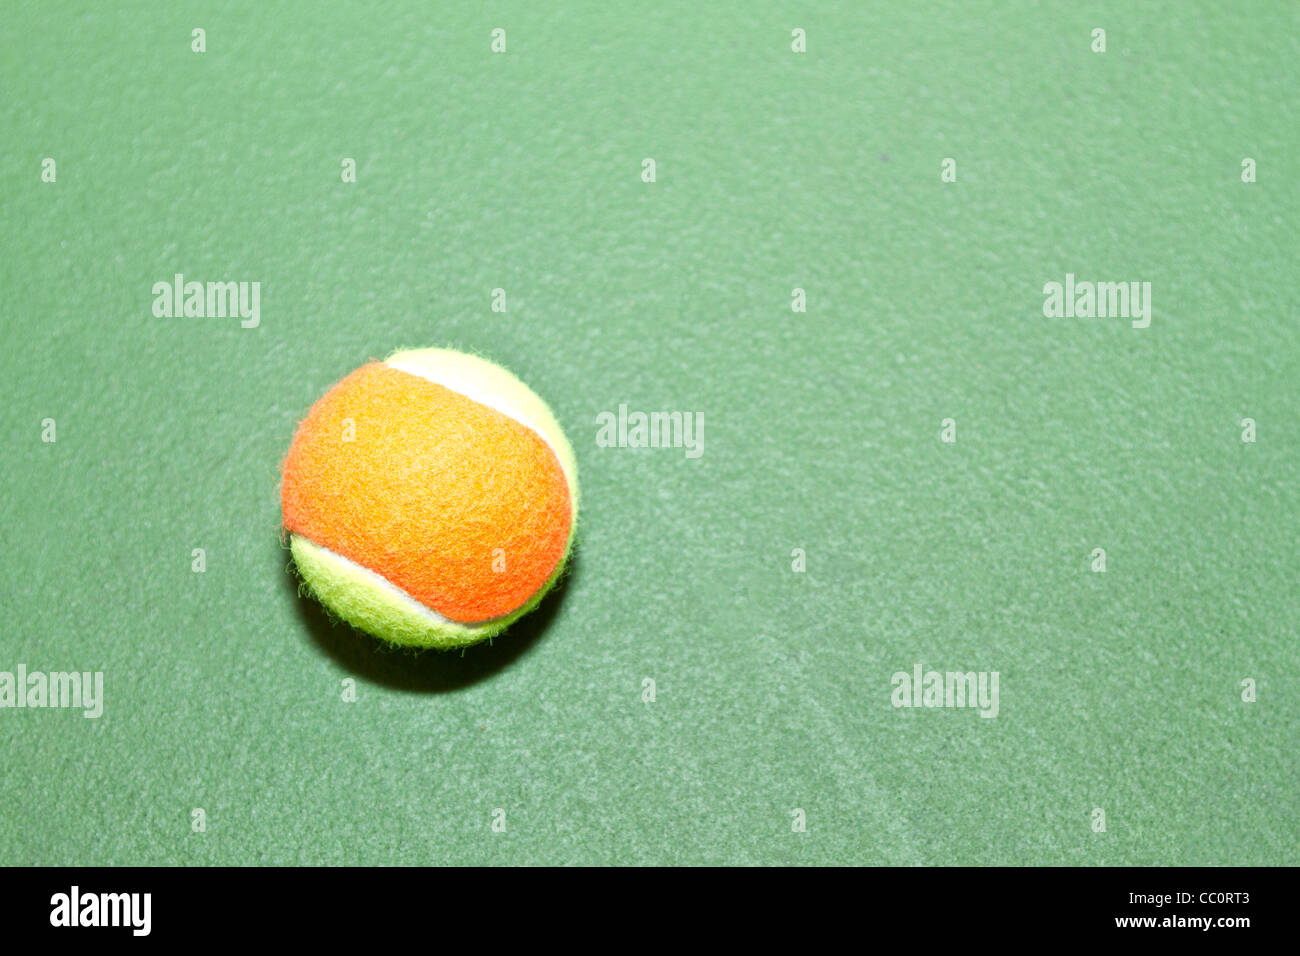 Single tennis ball on court, ready for play, practice, or lessons. Sports symbol is surrounded by copy space. Stock Photo